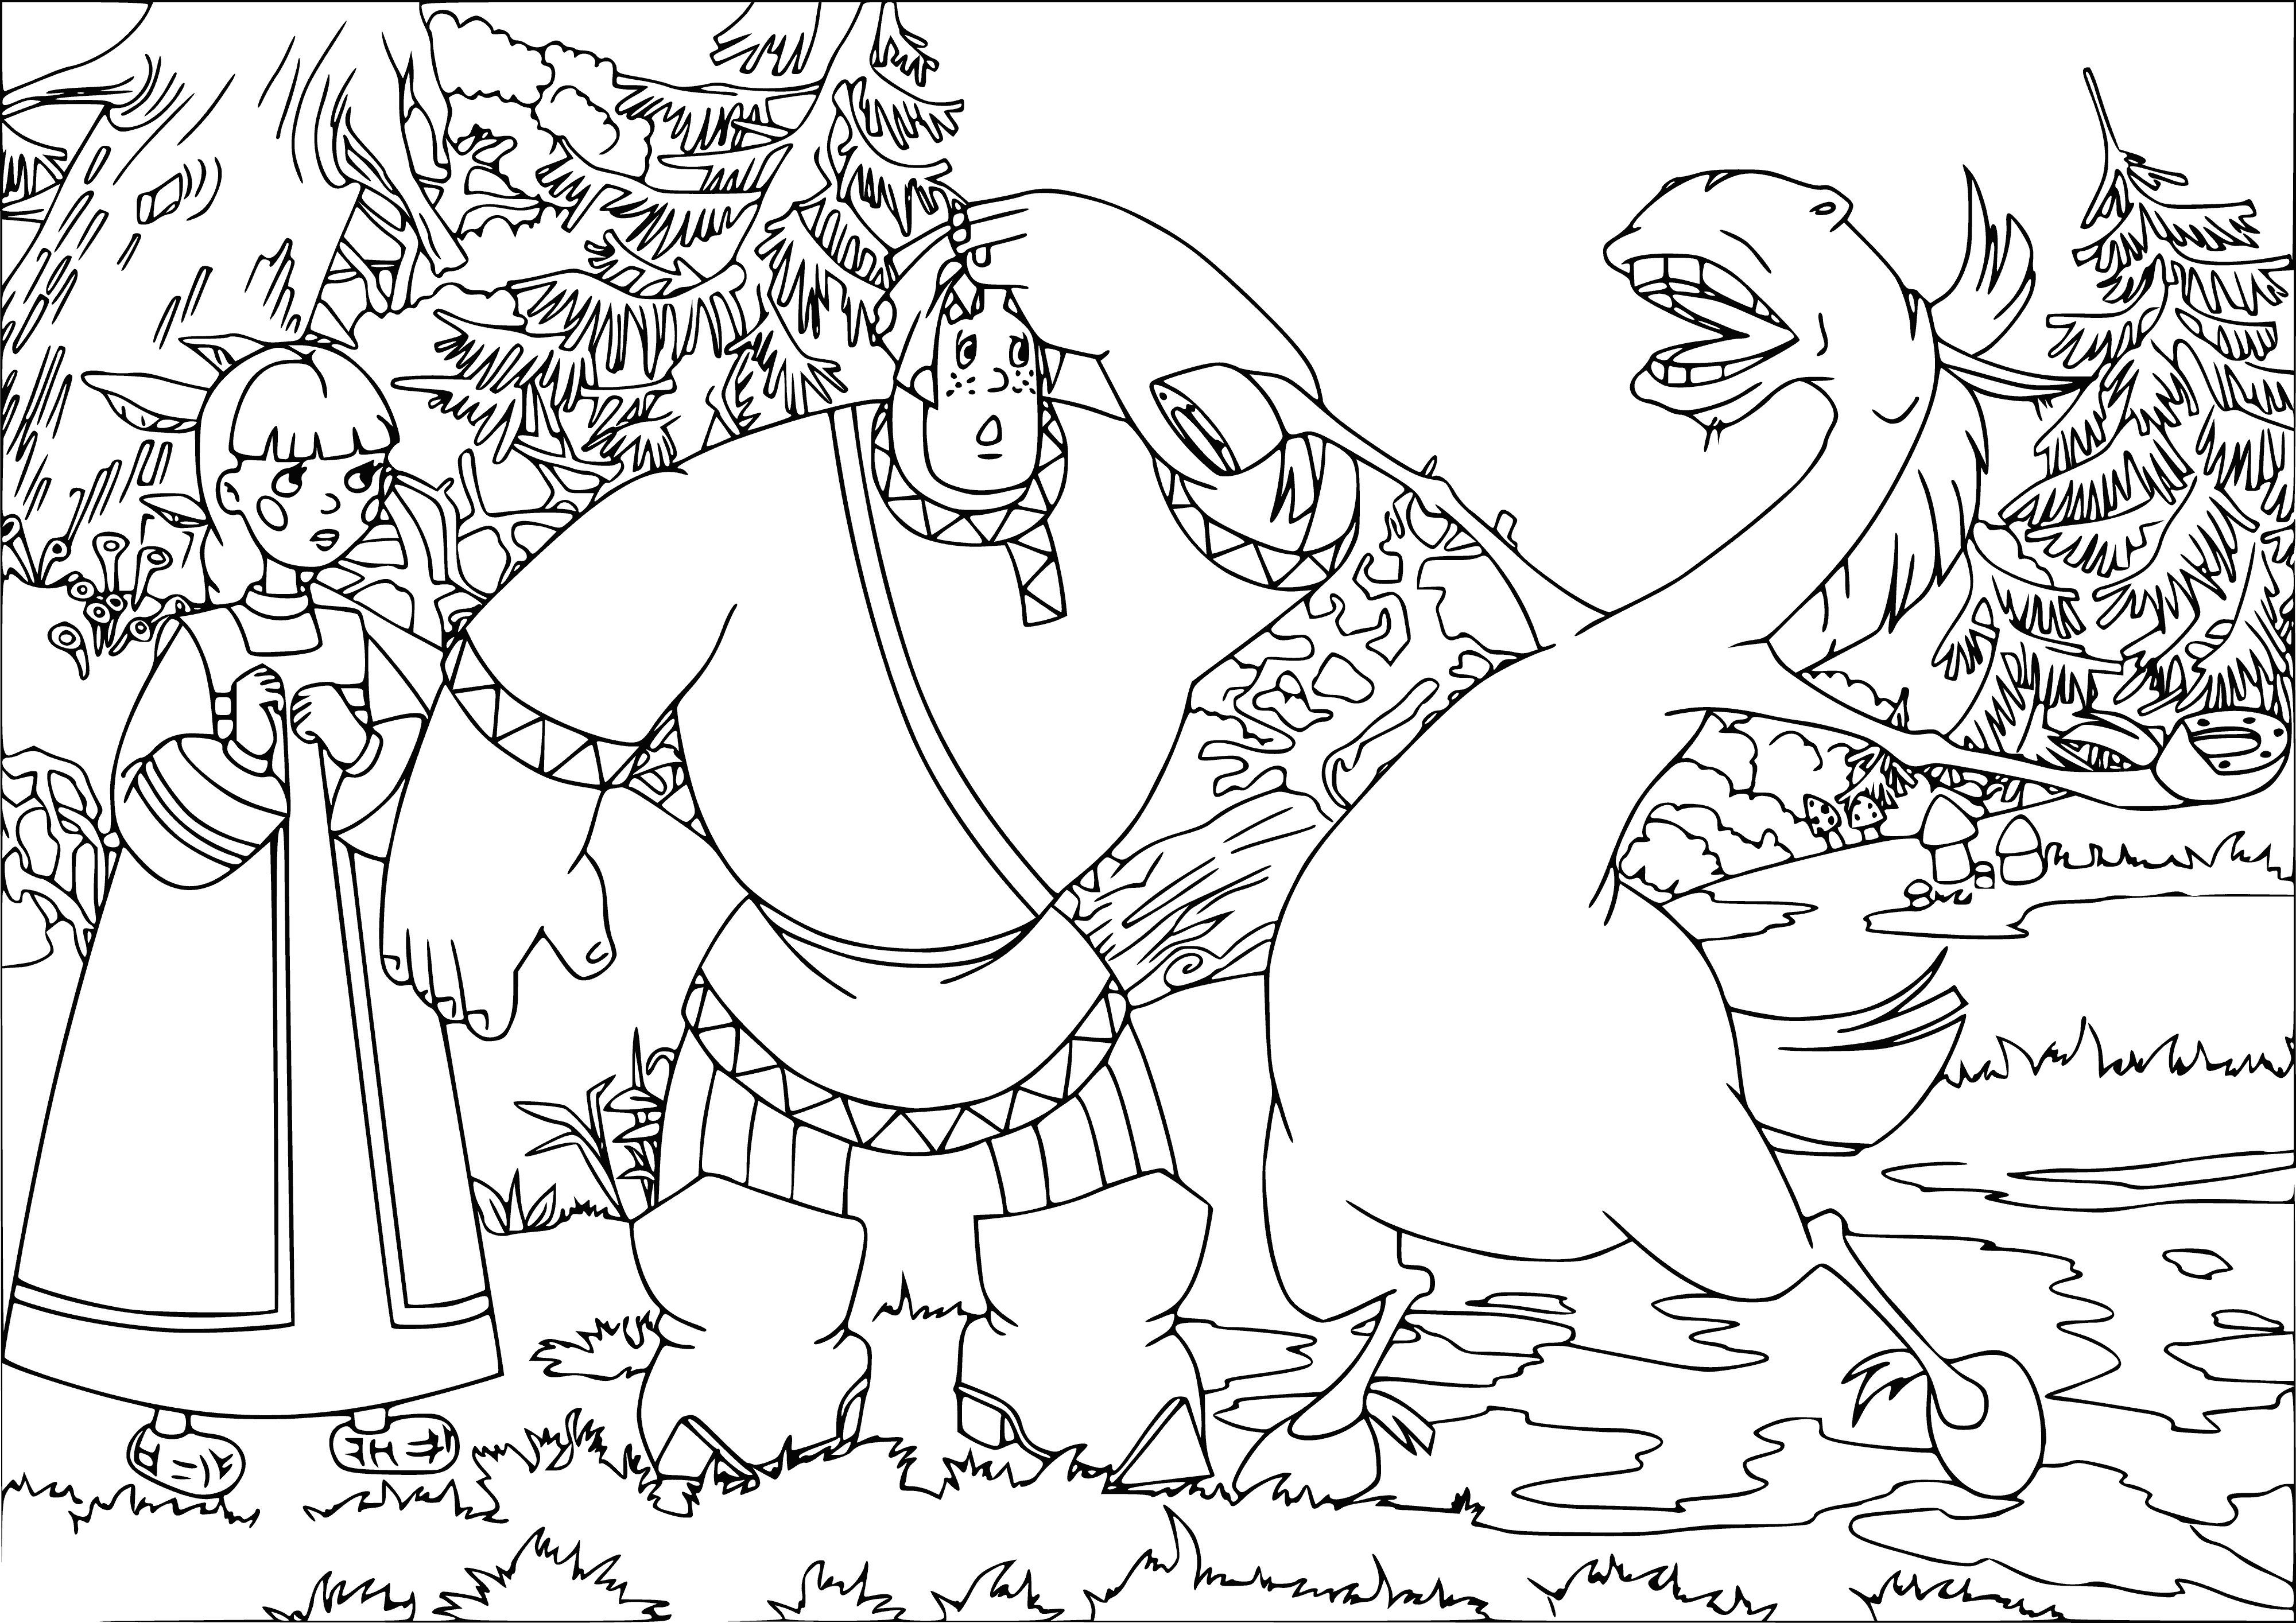 coloring page: Alyosha Popovich rides a talking horse, Caesar, as Tugarin the serpent wraps around them in conversation; Caesar looking calm, Tugarin serious and intense.